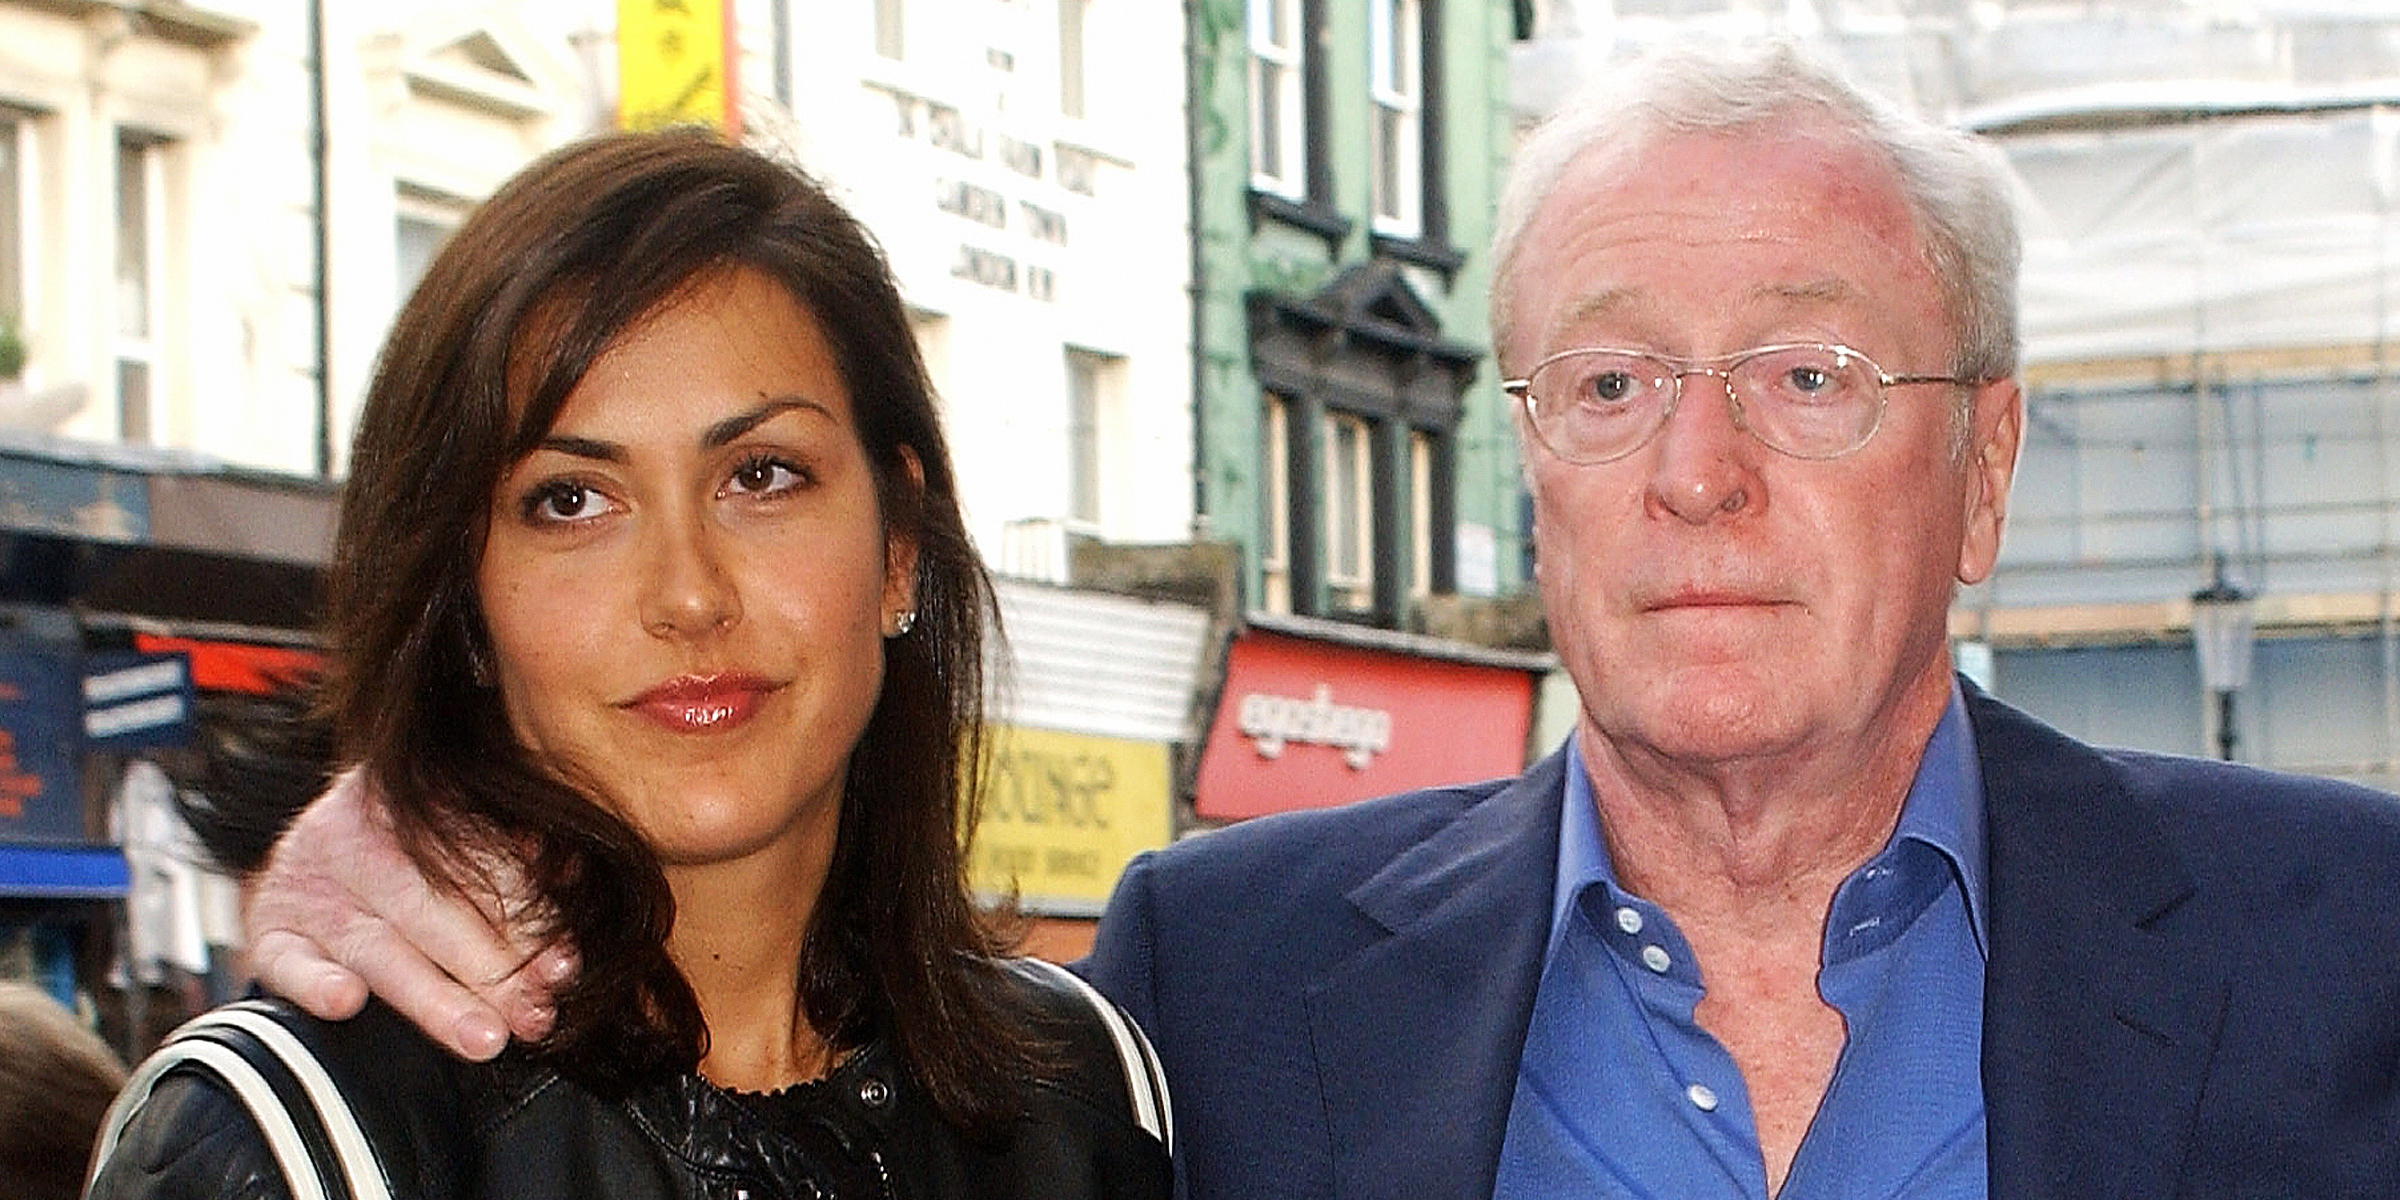 Natasha Caine and Michael Caine | Source: Getty Images